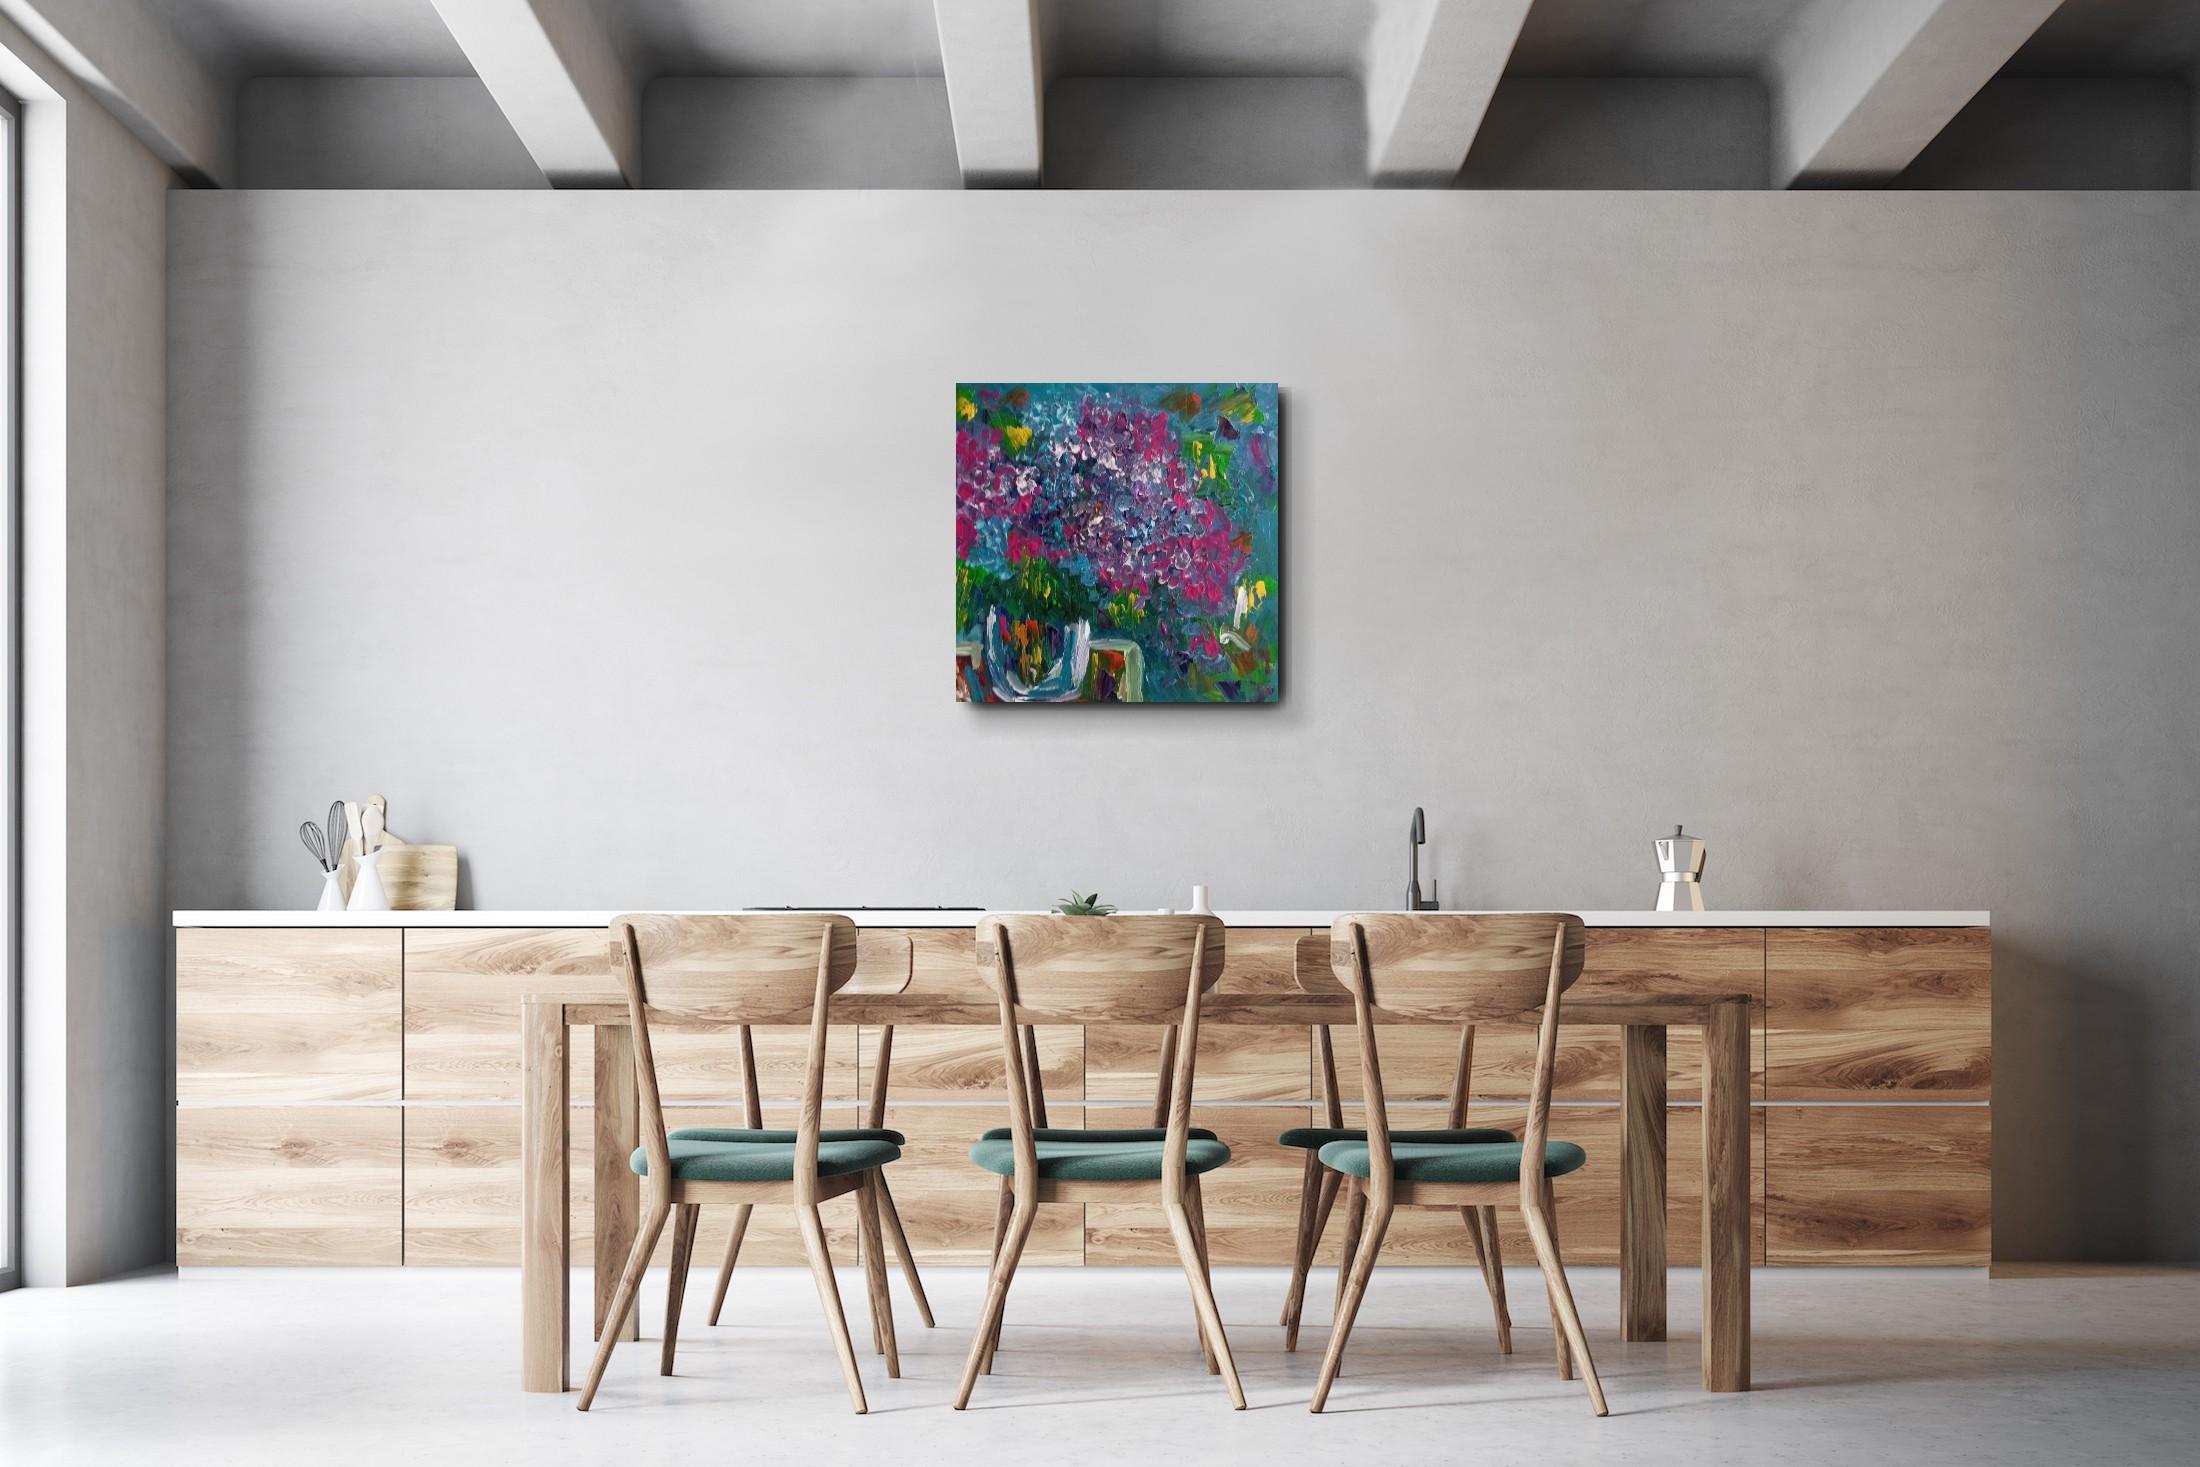 In this abstract floral artwork I experience the world of spring flowers through the bright colors of a spring period.

While painting, I sought to capture the beauty of blooming lilacs which are full of different colors.

In my art practice I love